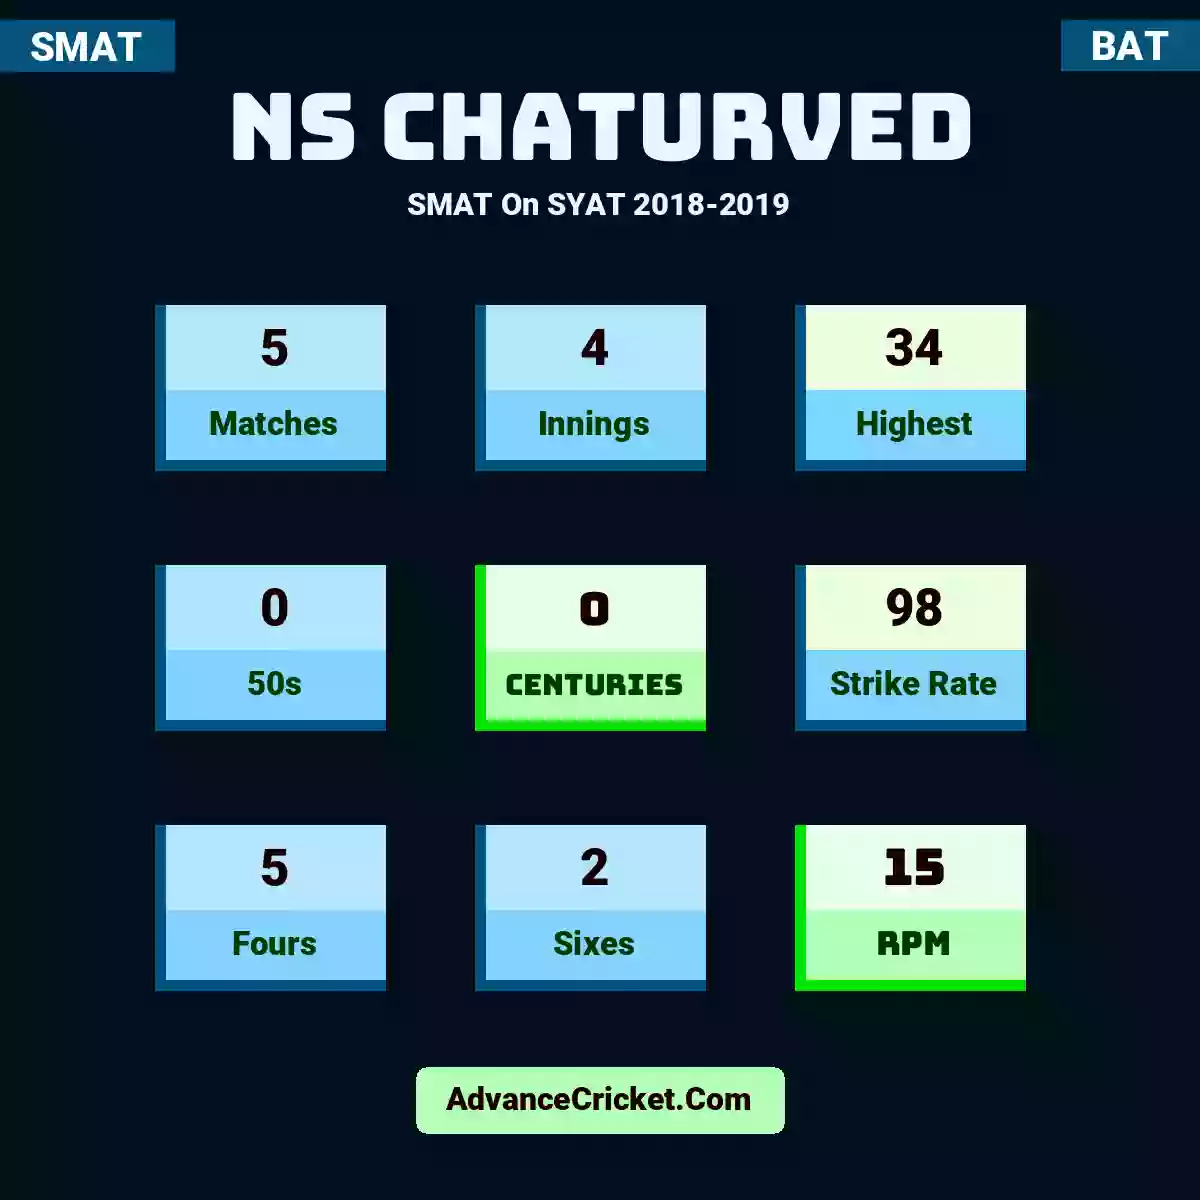 NS Chaturved SMAT  On SYAT 2018-2019, NS Chaturved played 5 matches, scored 34 runs as highest, 0 half-centuries, and 0 centuries, with a strike rate of 98. N.Chaturved hit 5 fours and 2 sixes, with an RPM of 15.